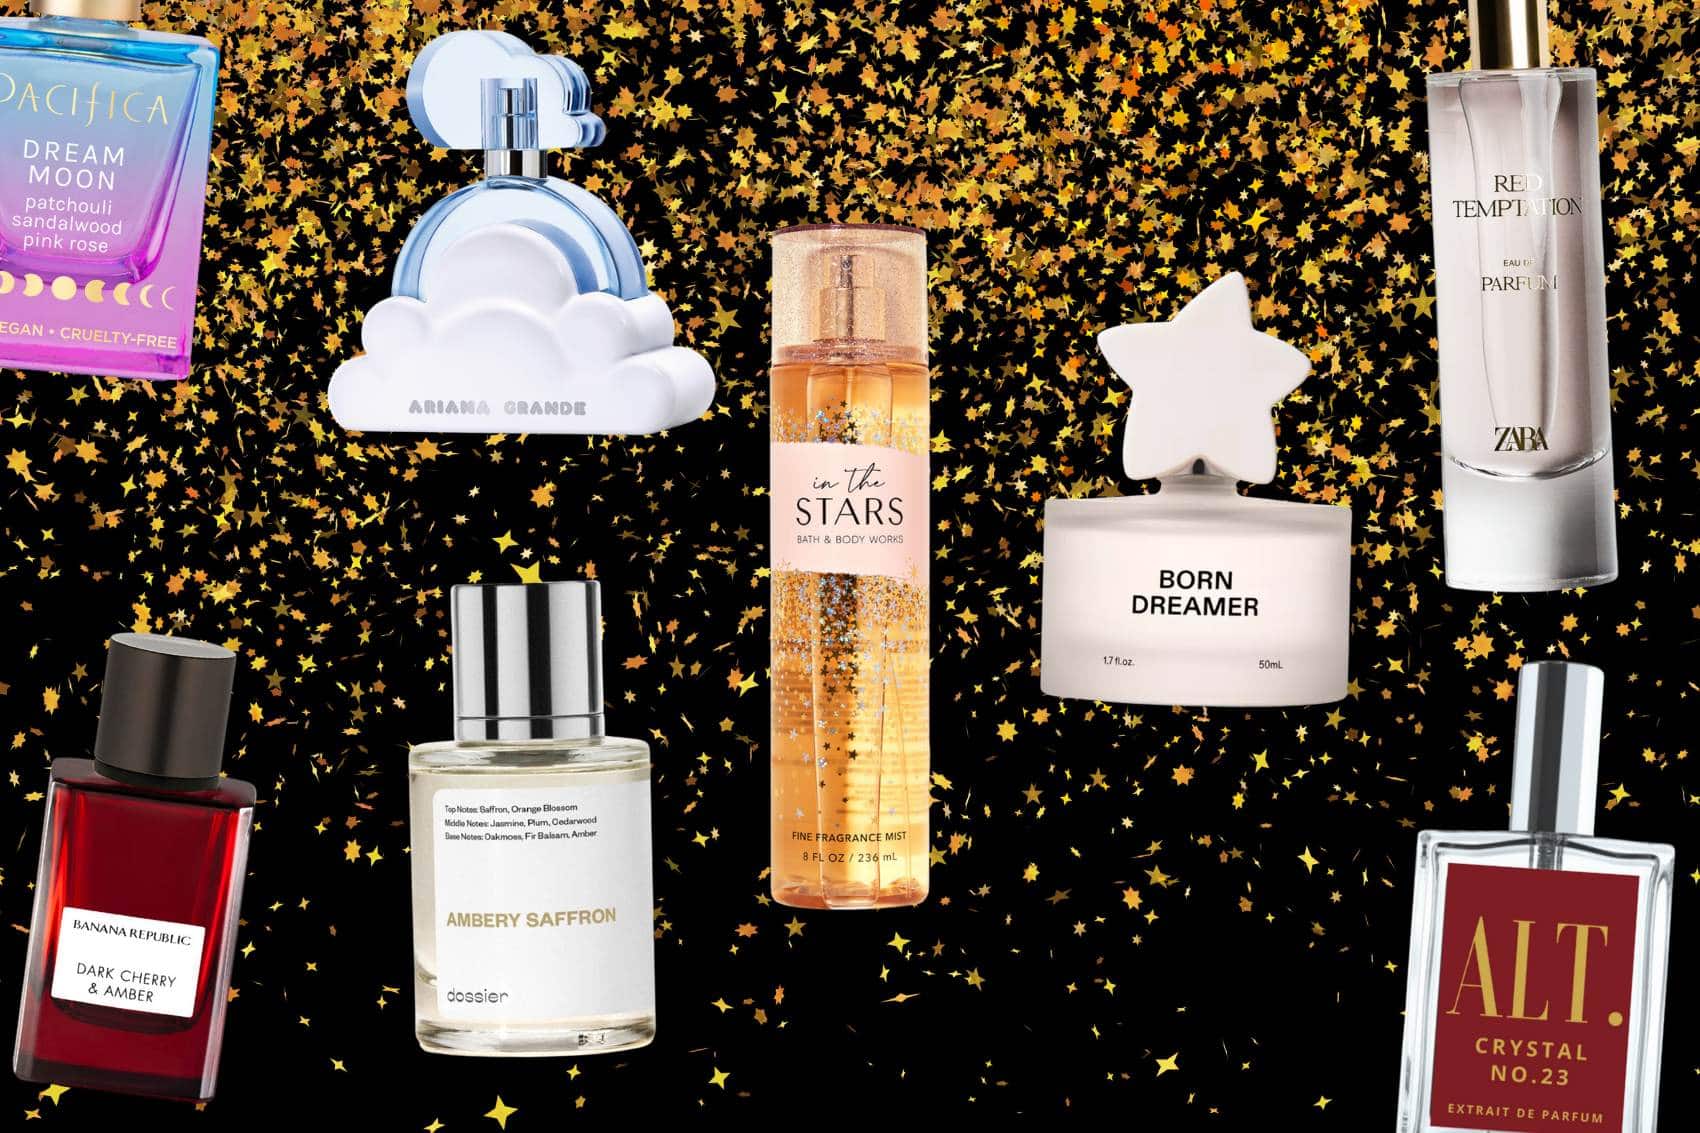 Bath and Body Works In The Stars dupes